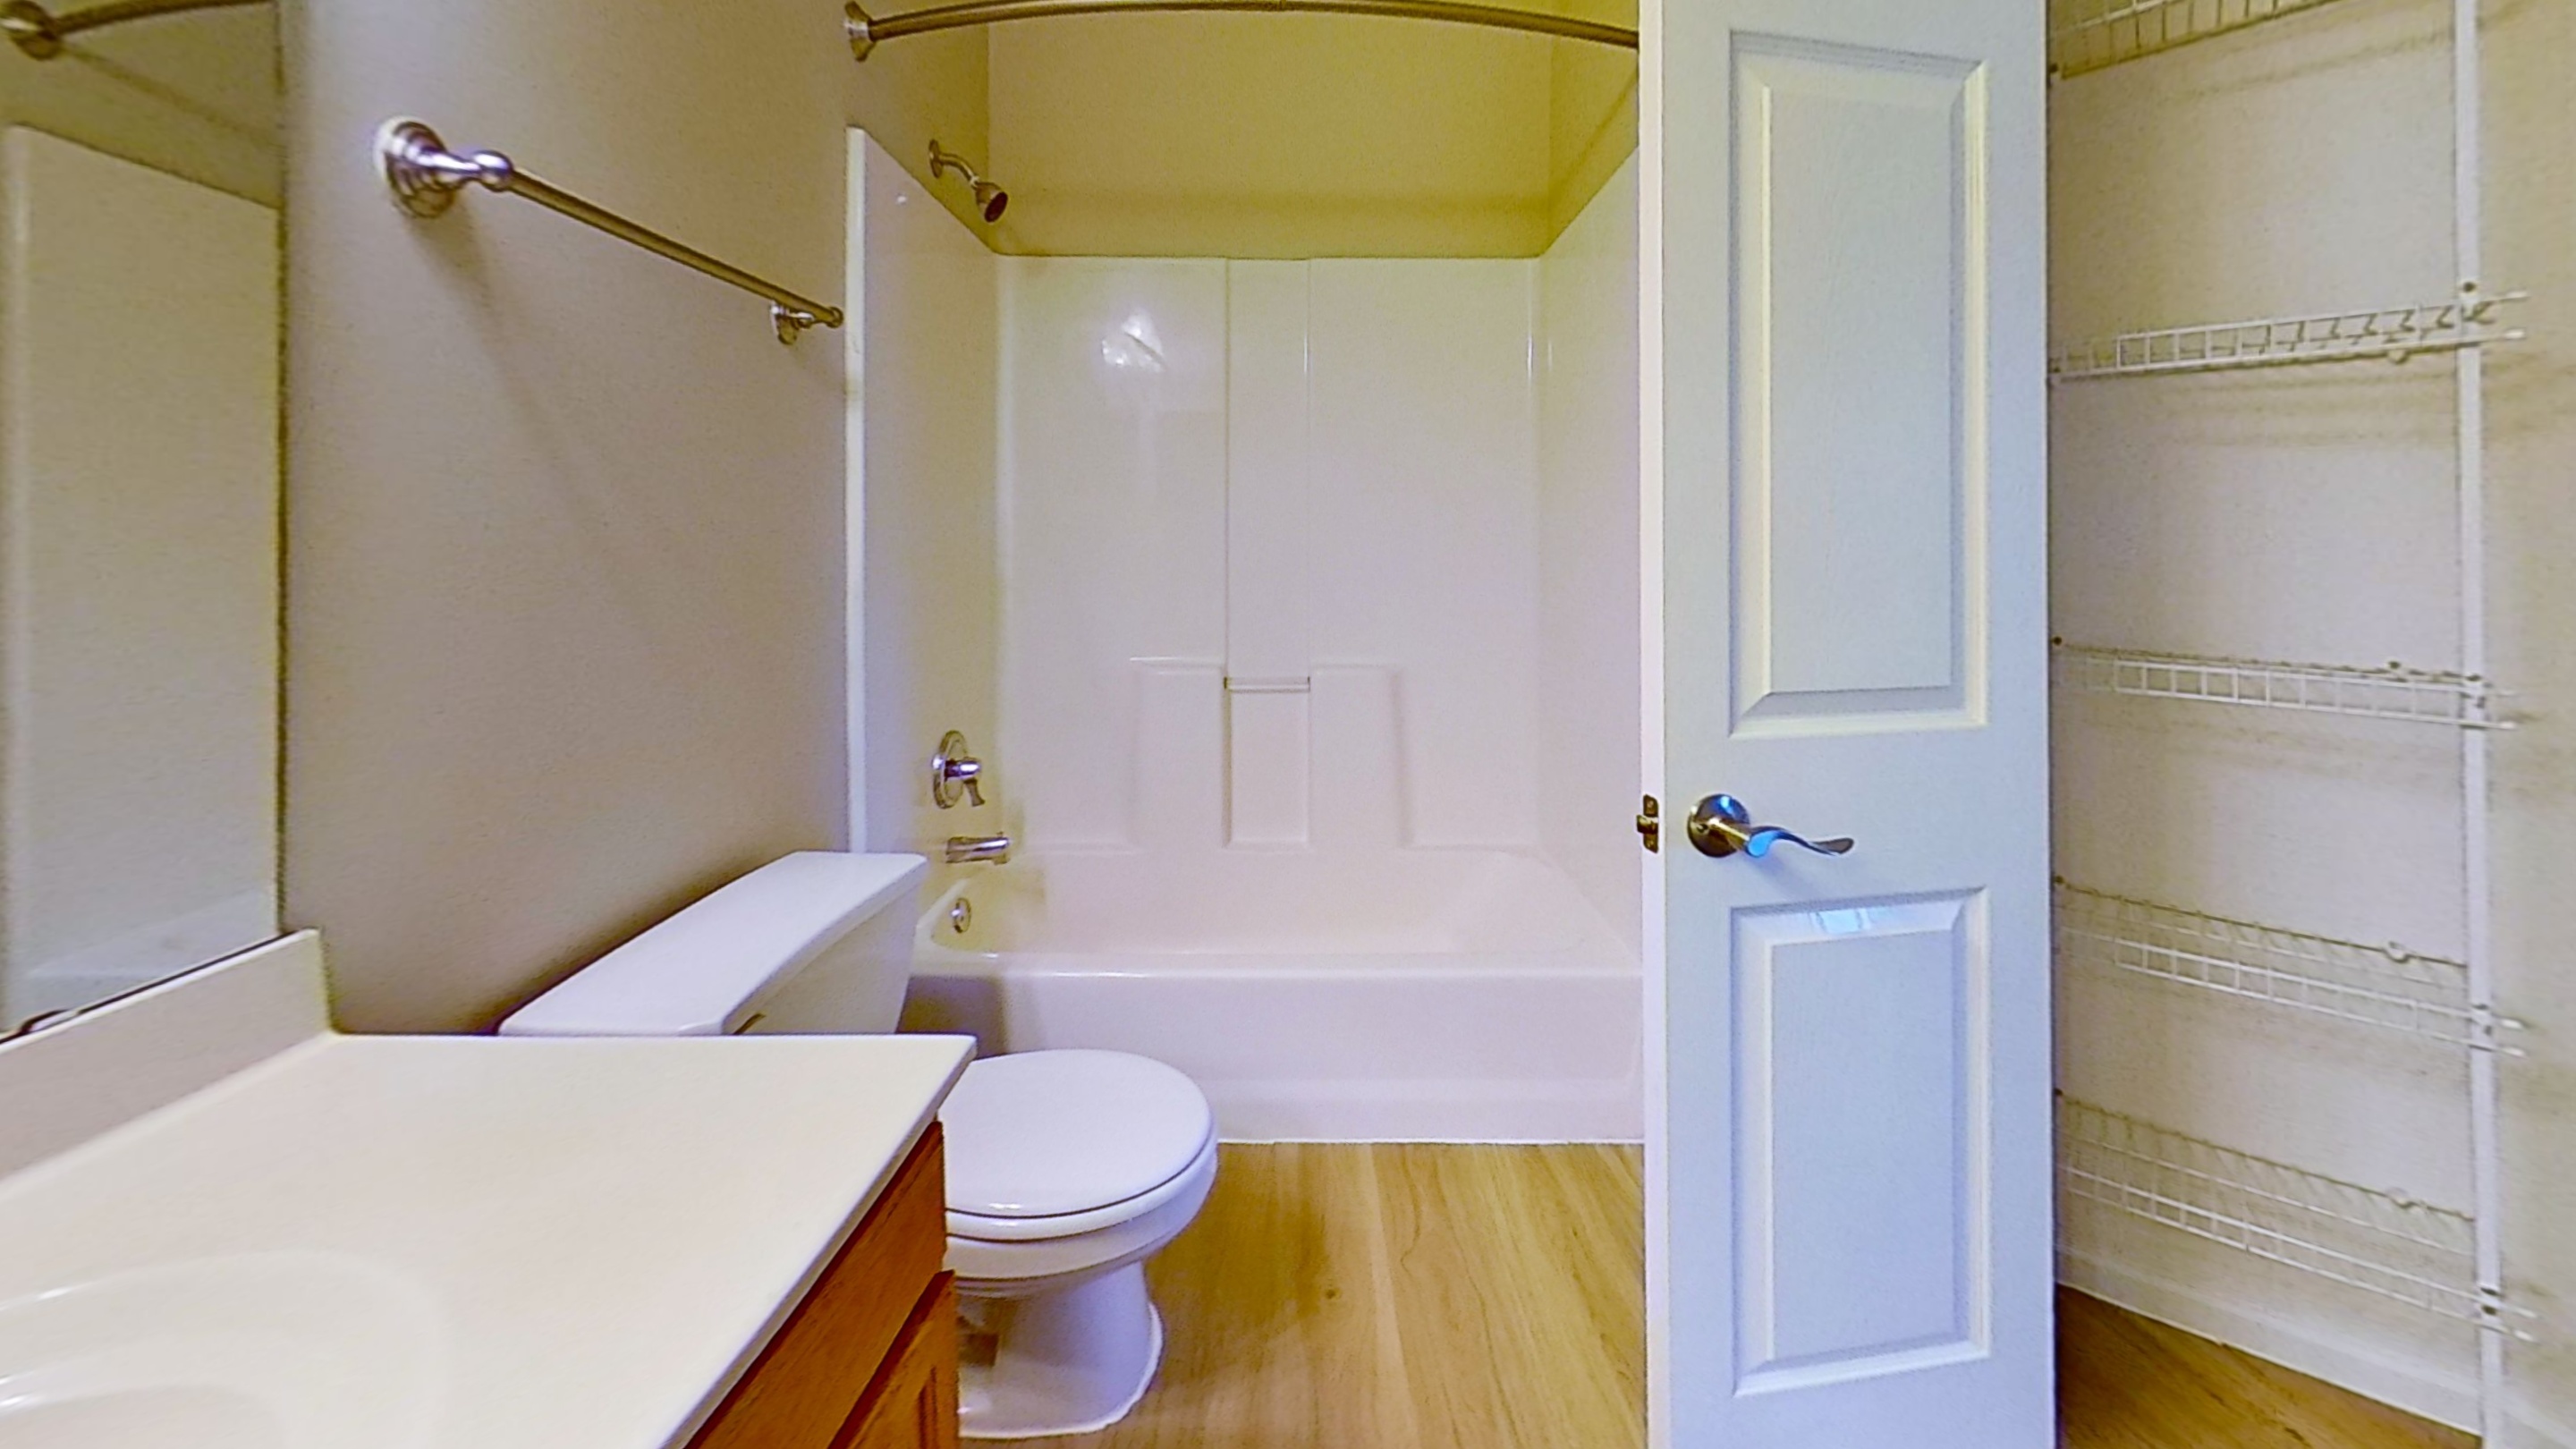 Refined Bathrooms at Polo Downs Apartments in Fenton, MO